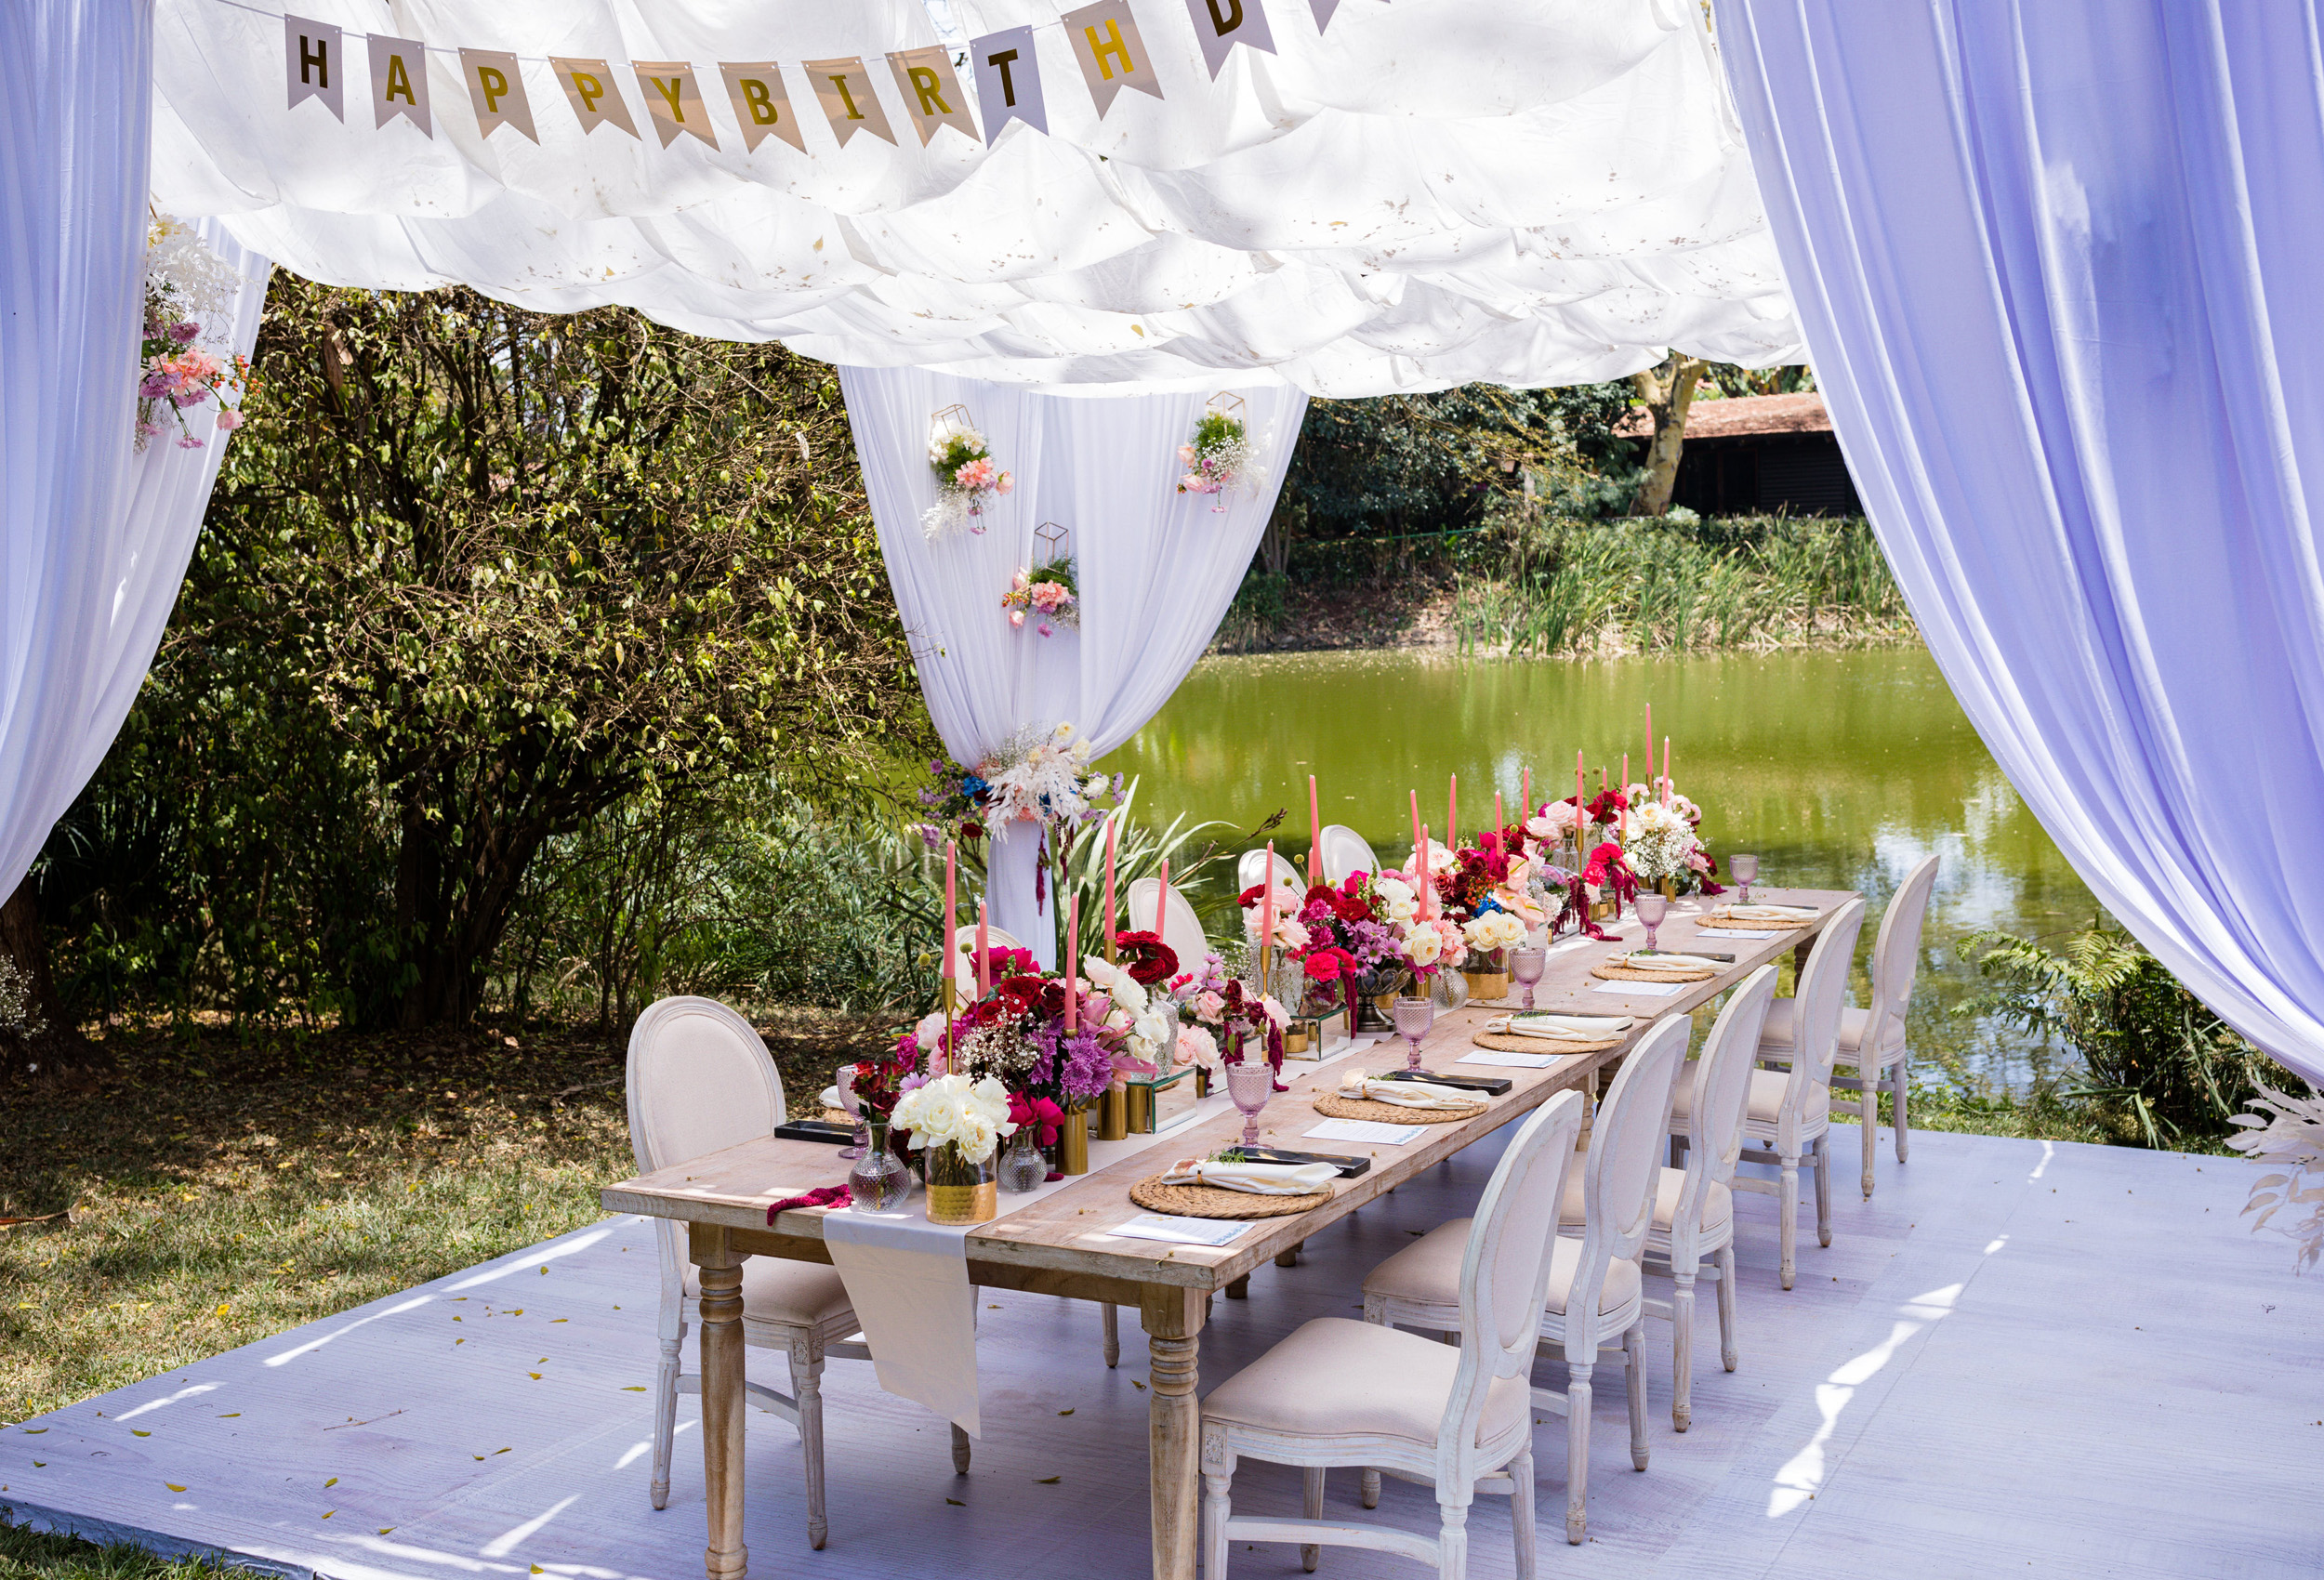 What To Look for When Hiring A Birthday Venue